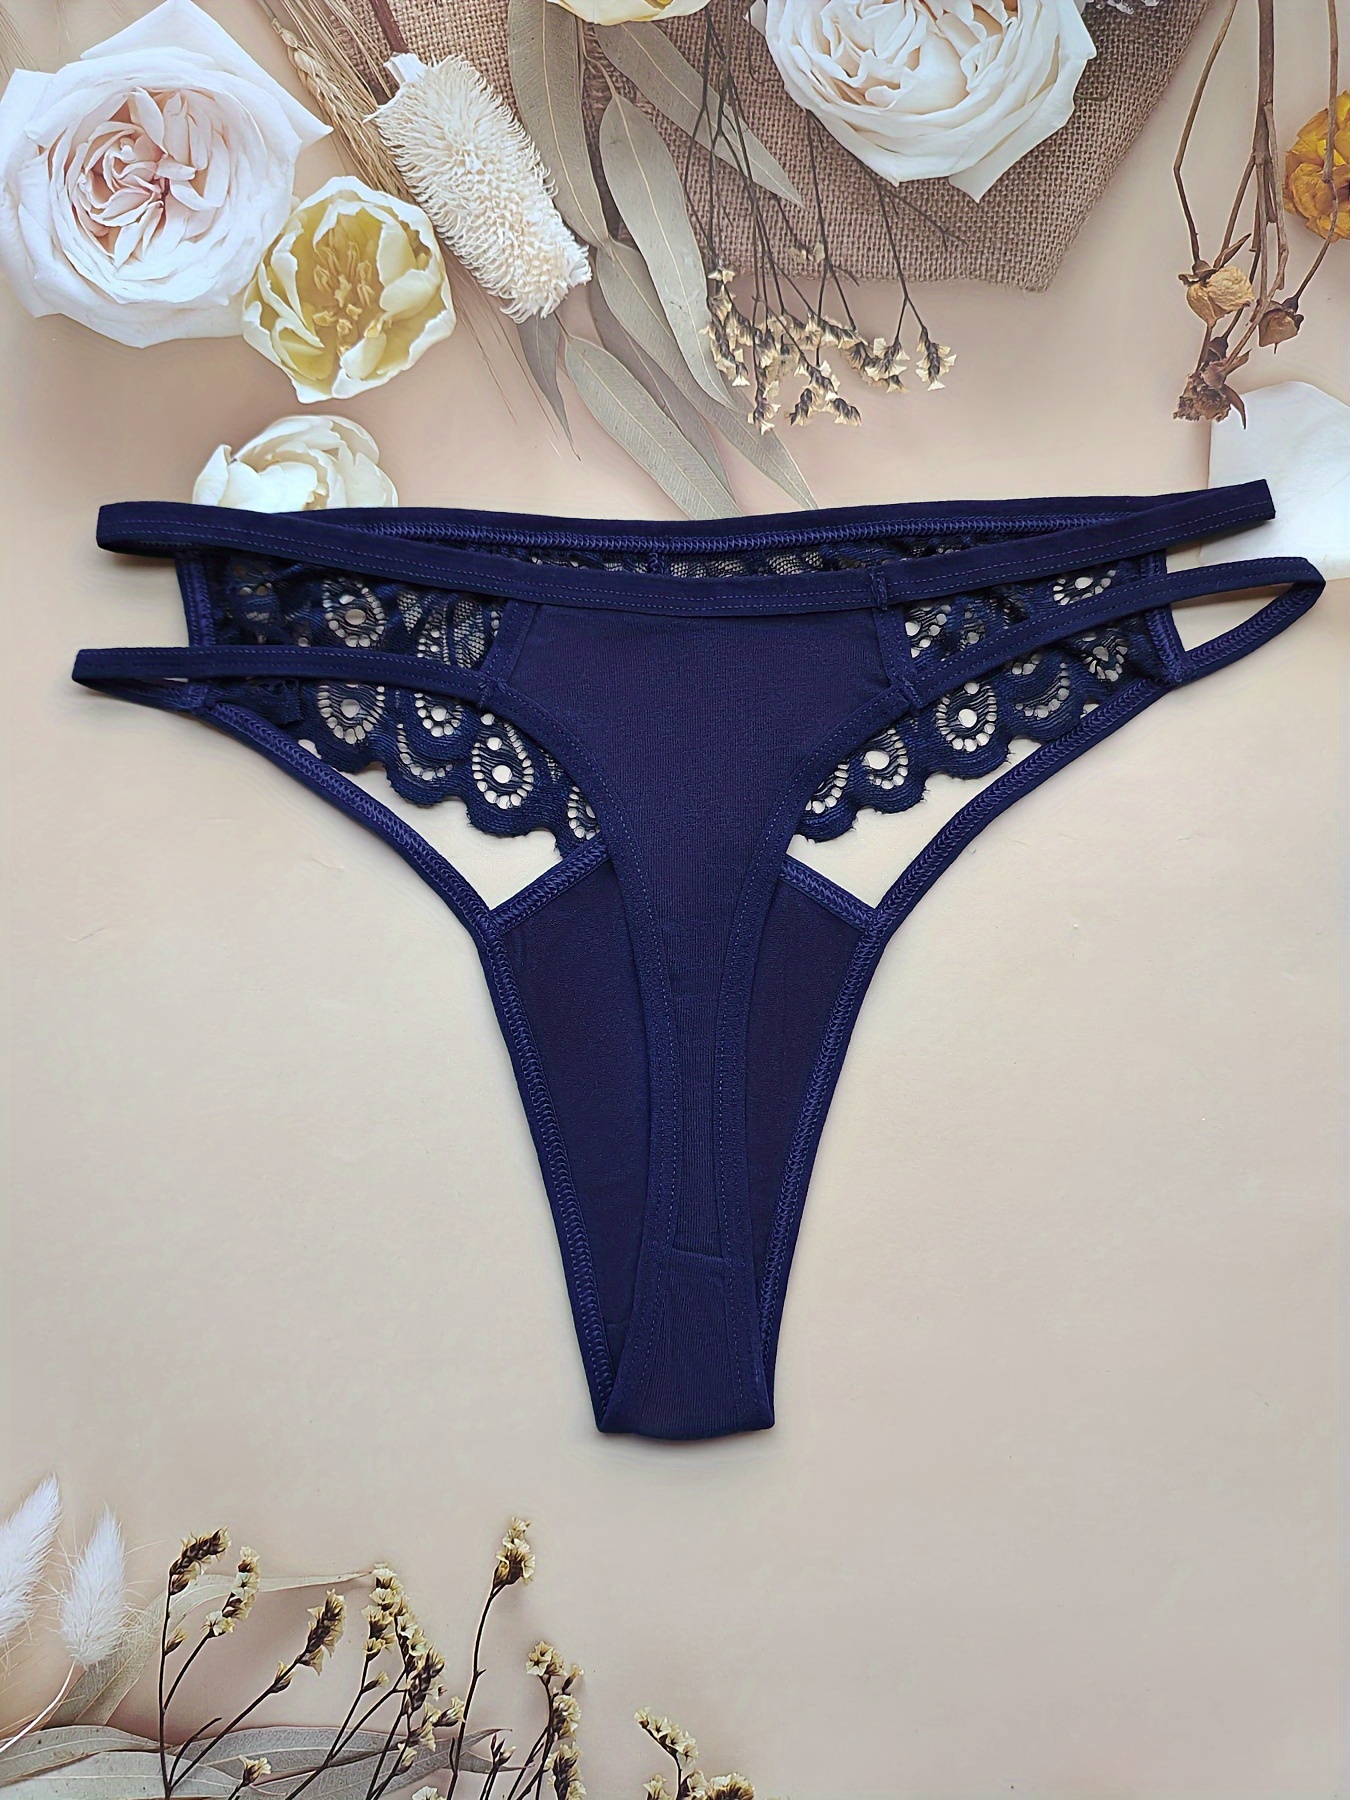 Hipster Panties for Girls: The Comfy and Stylish Underwear Option – D'chica